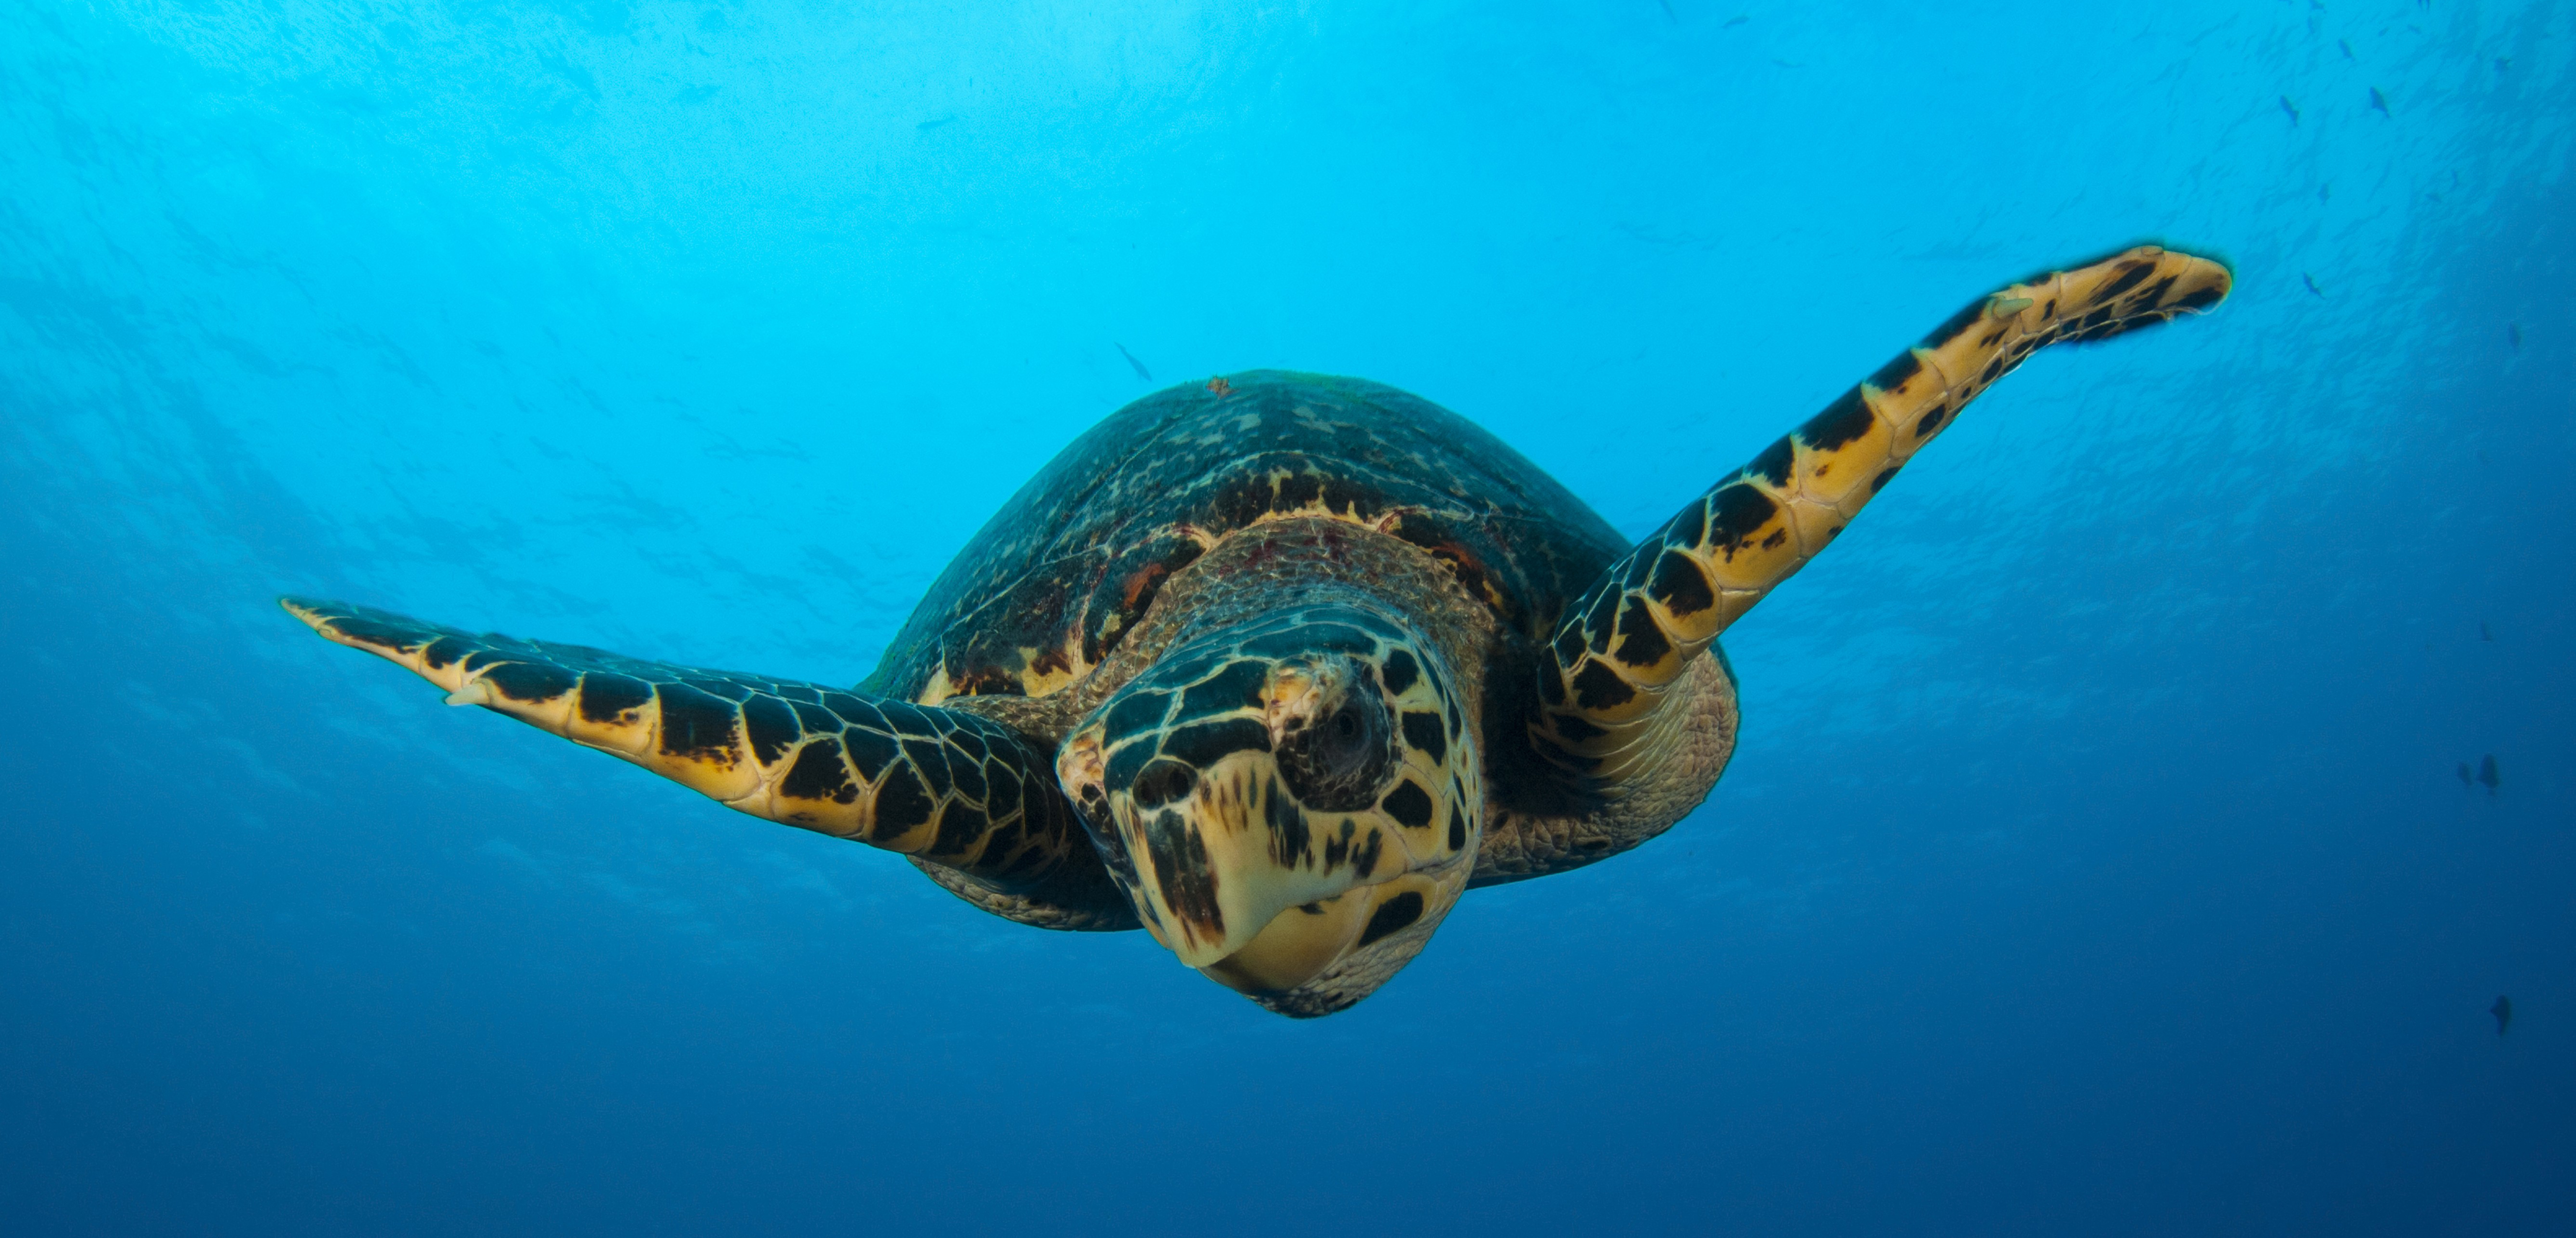 There are new laws in place to protect Turks and Caicos’ hawksbill sea turtles. Now the question is whether they’ll make a difference. Photo by Steve Jones/Stocktrek Images/Corbis